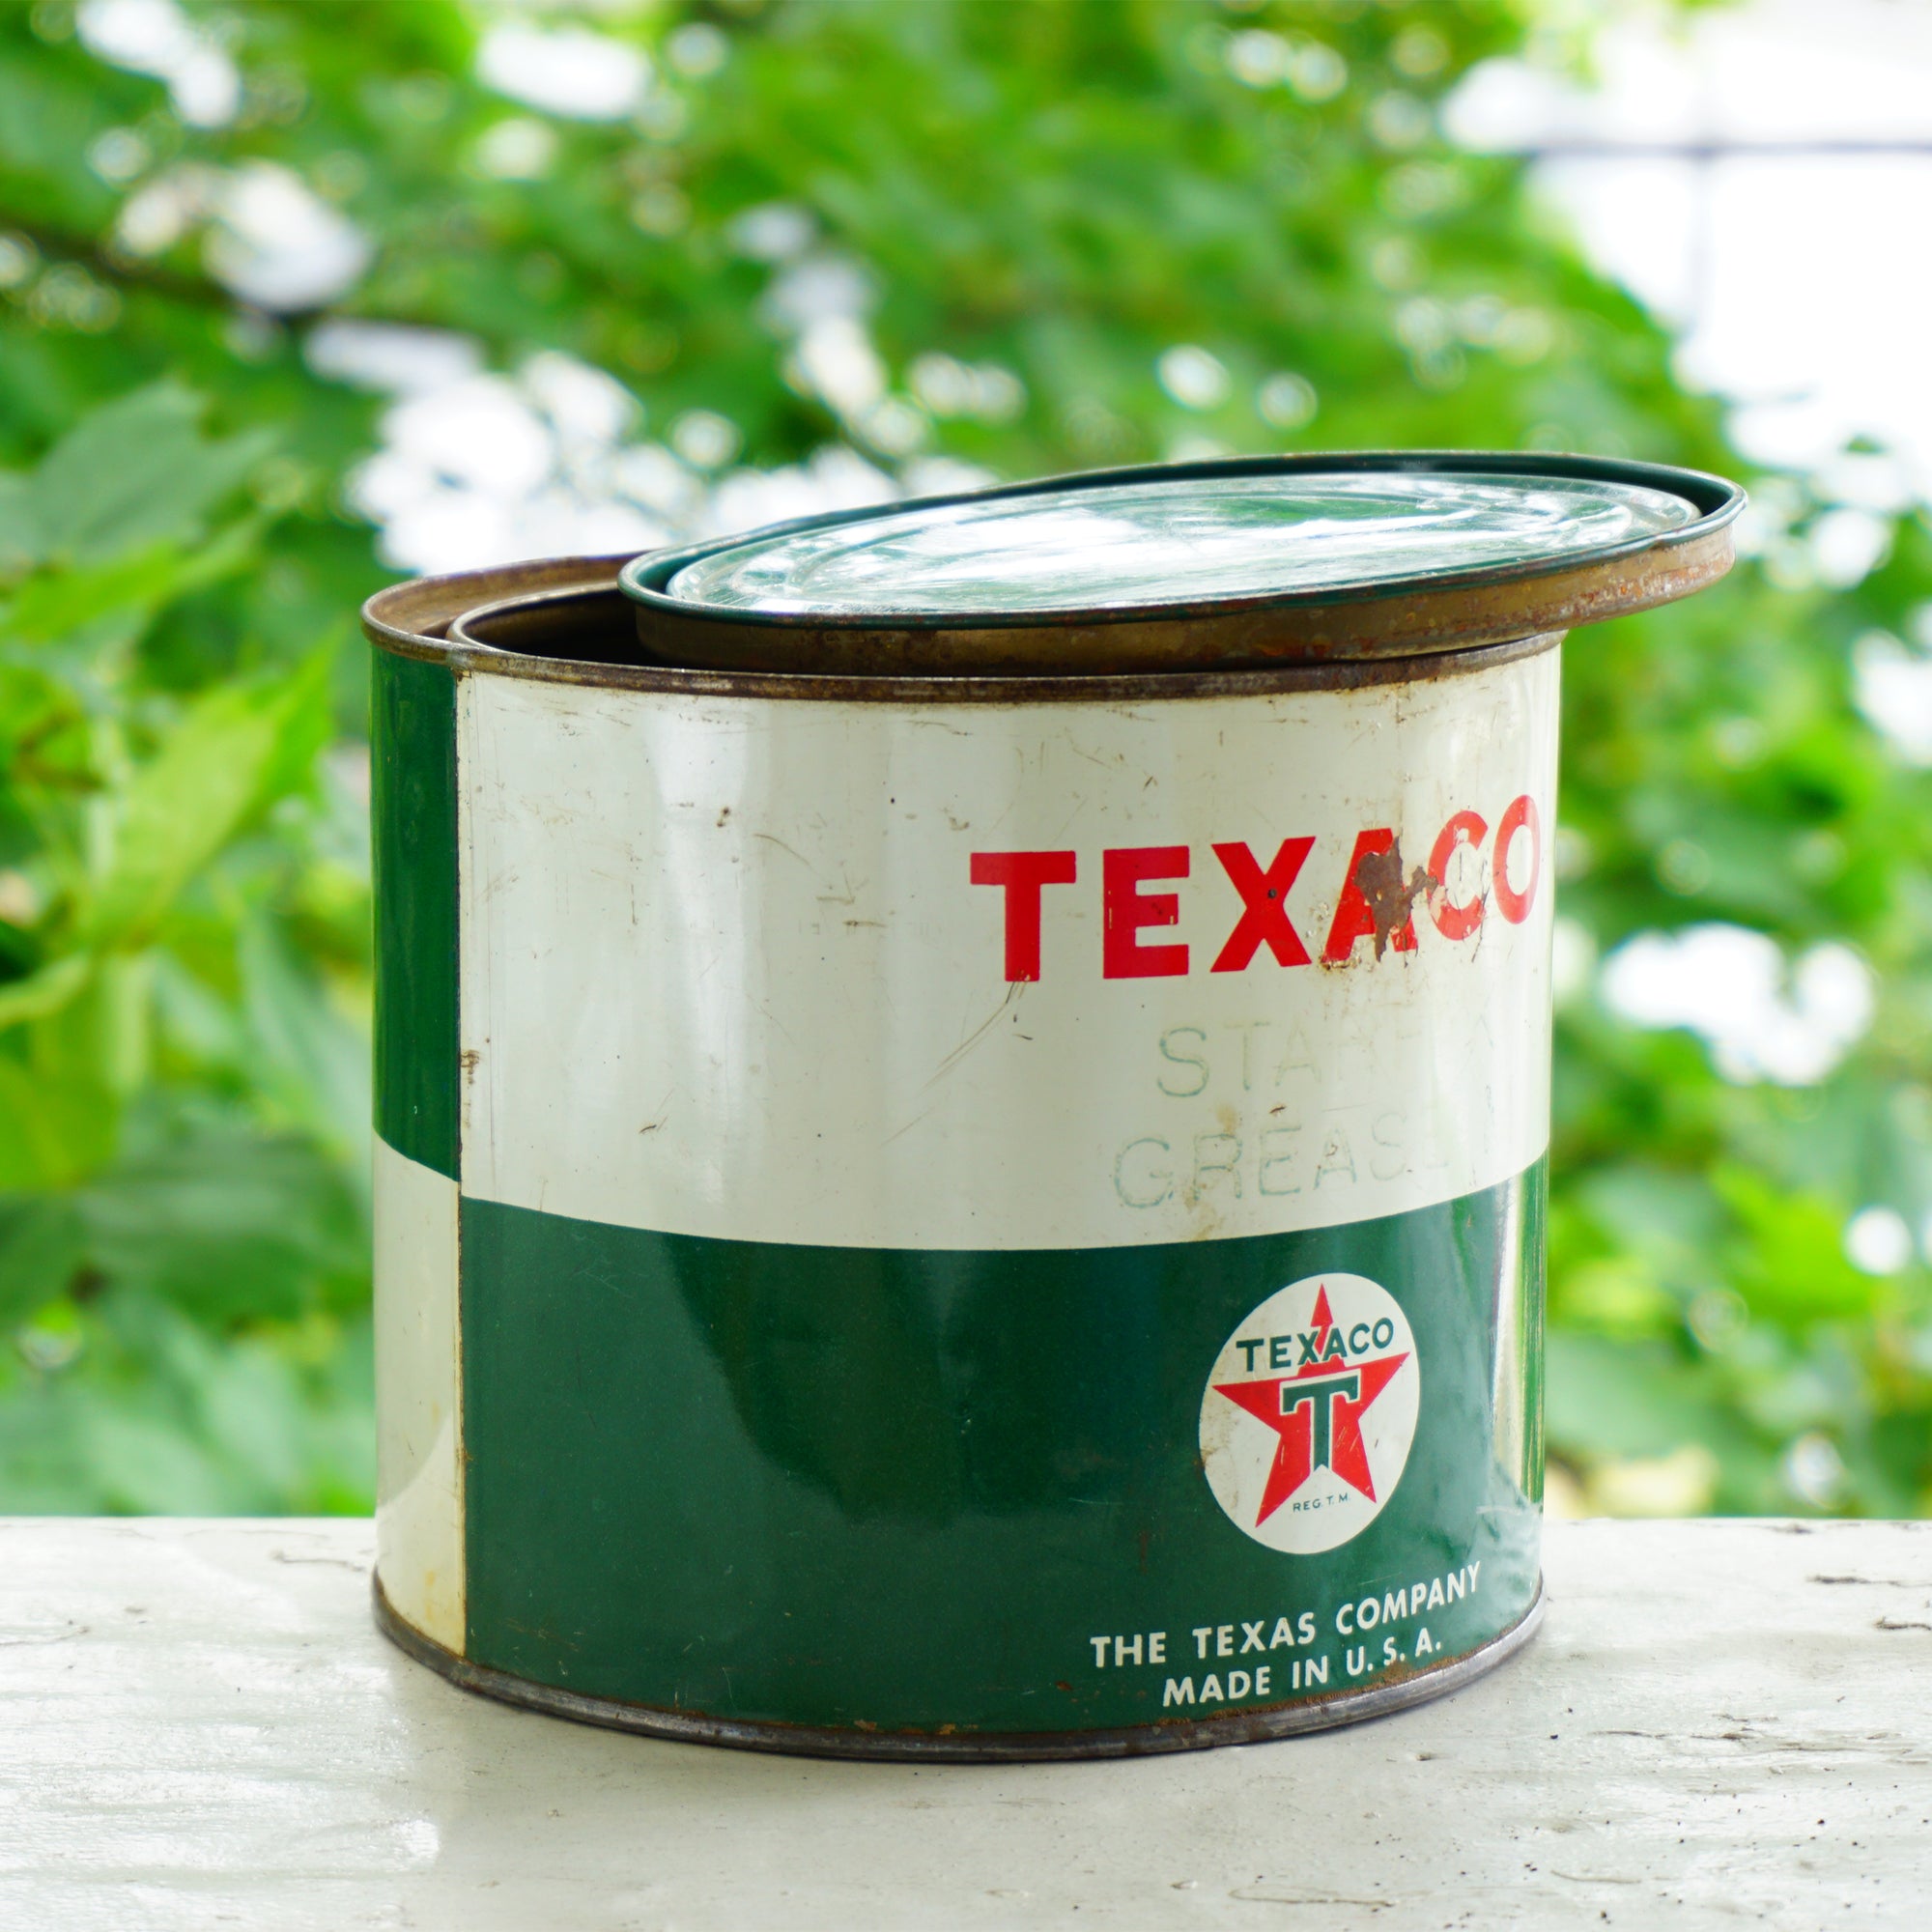 Vintage TEXACO Gas Station Starfak Grease M 5 Pound Tin Can w/ Cover. Made in U.S.A.